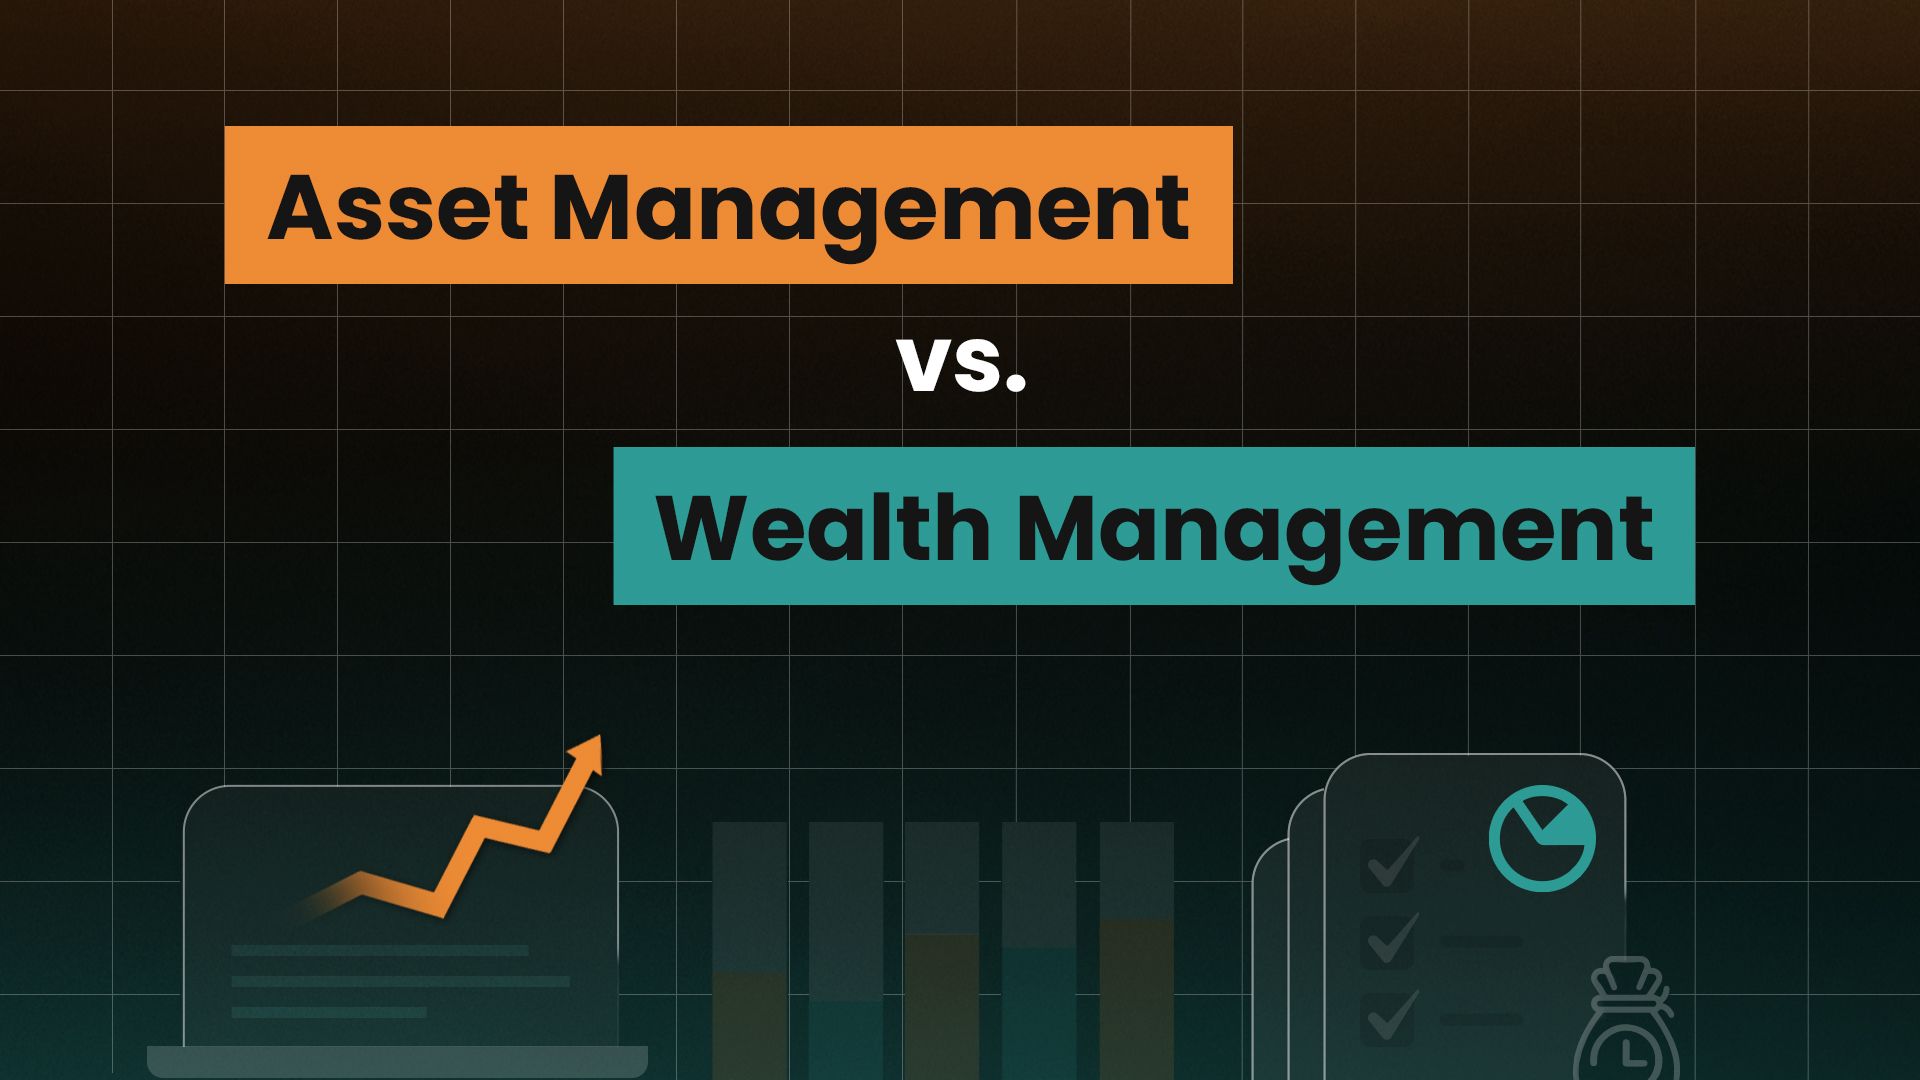 What Is The Difference Between Asset Management And Wealth Management